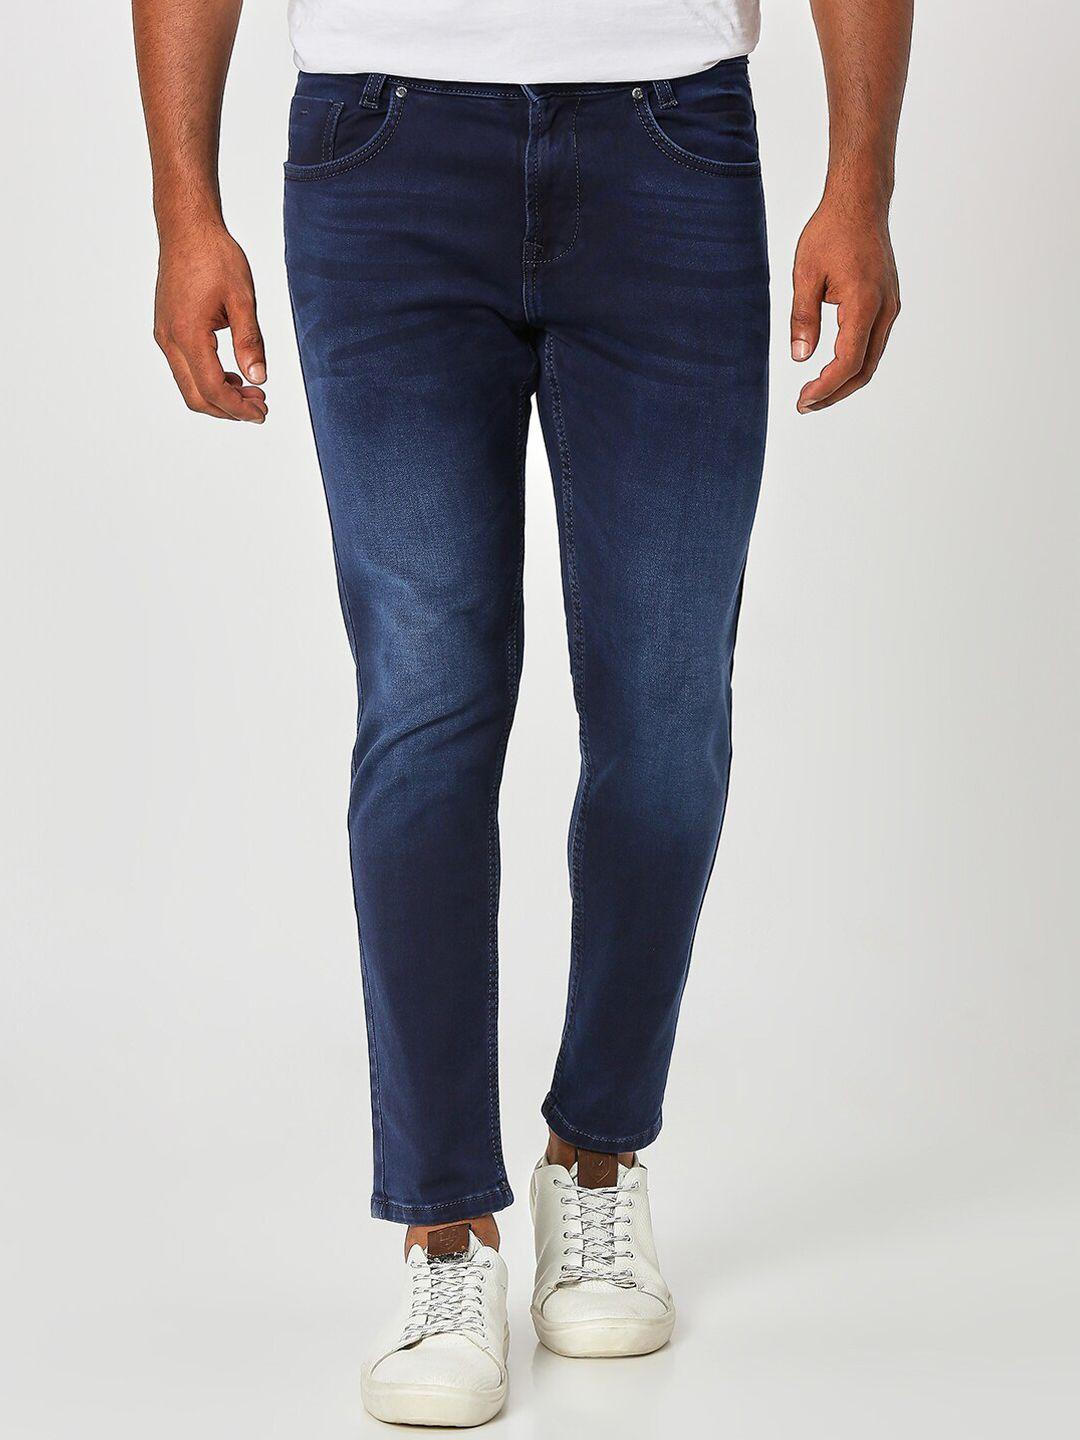 mufti-men-light-fade-stretchable-jeans